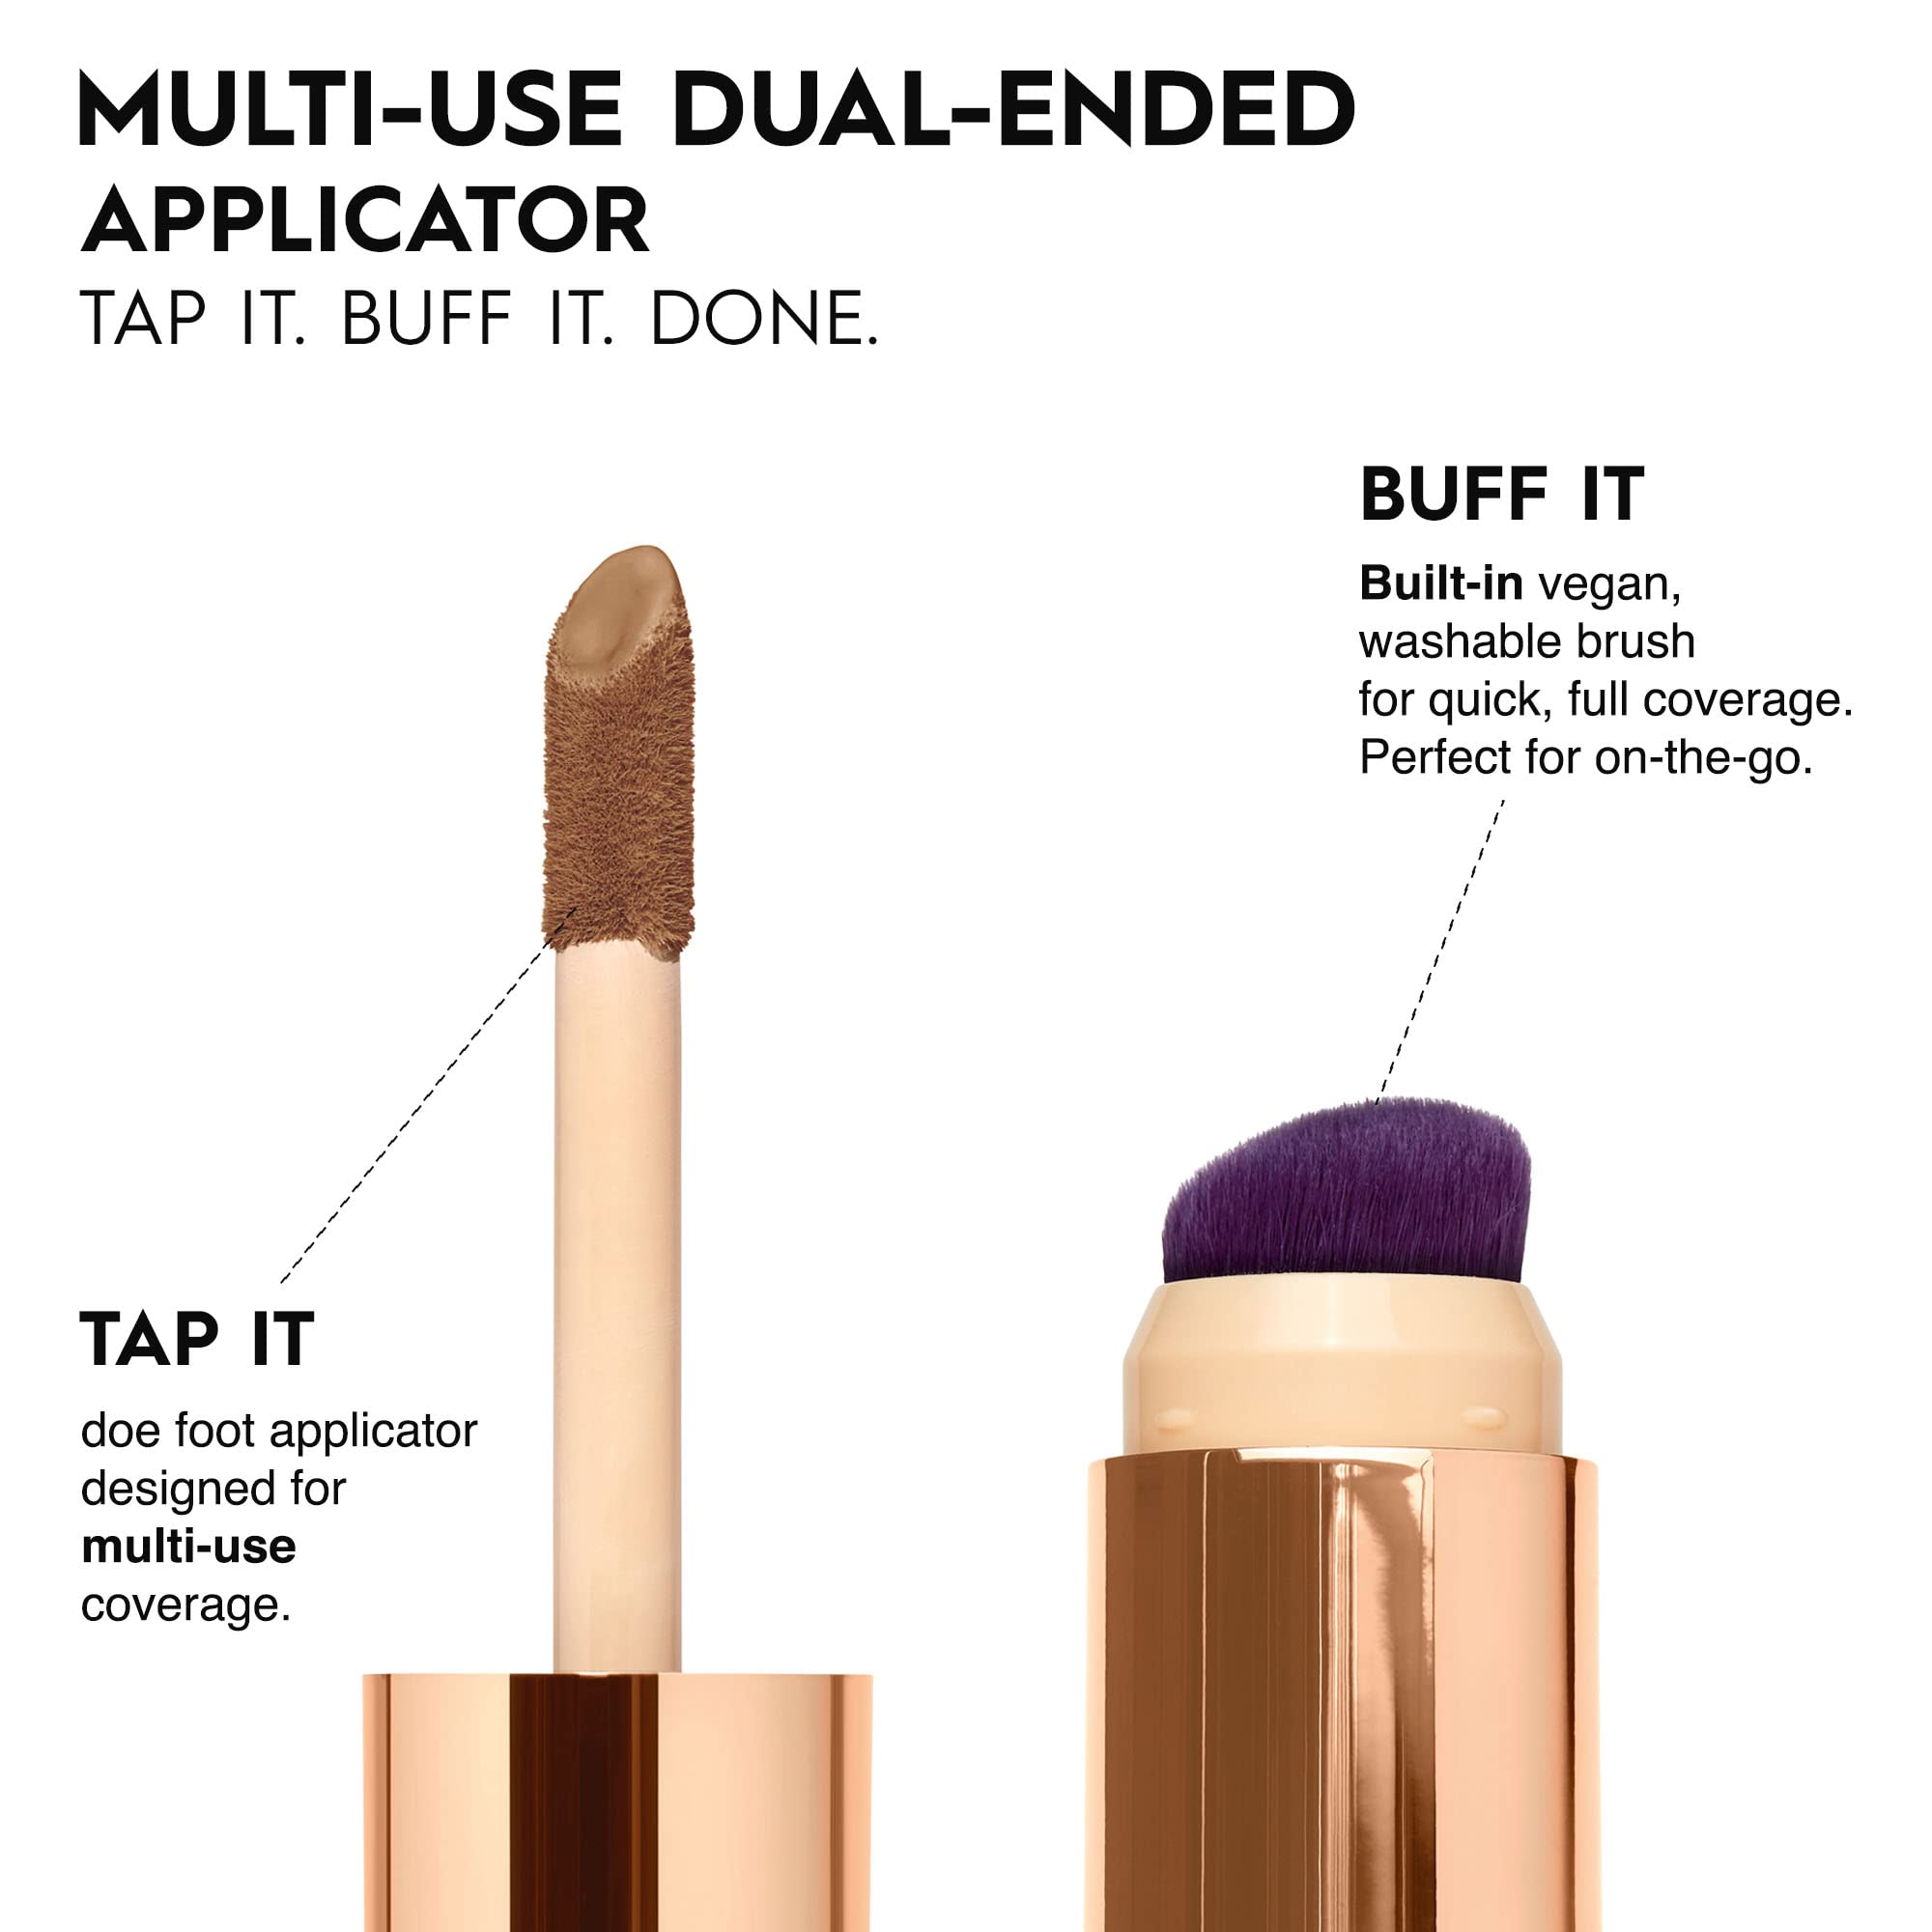 Urban Decay Quickie 24HR Multi-Use Full Coverage Concealer – Waterproof – Dual-Ended with Brush - Hydrating with Vitamin E - Natural Finish - Vegan & Cruelty Free - 20NN, 0.55 Oz